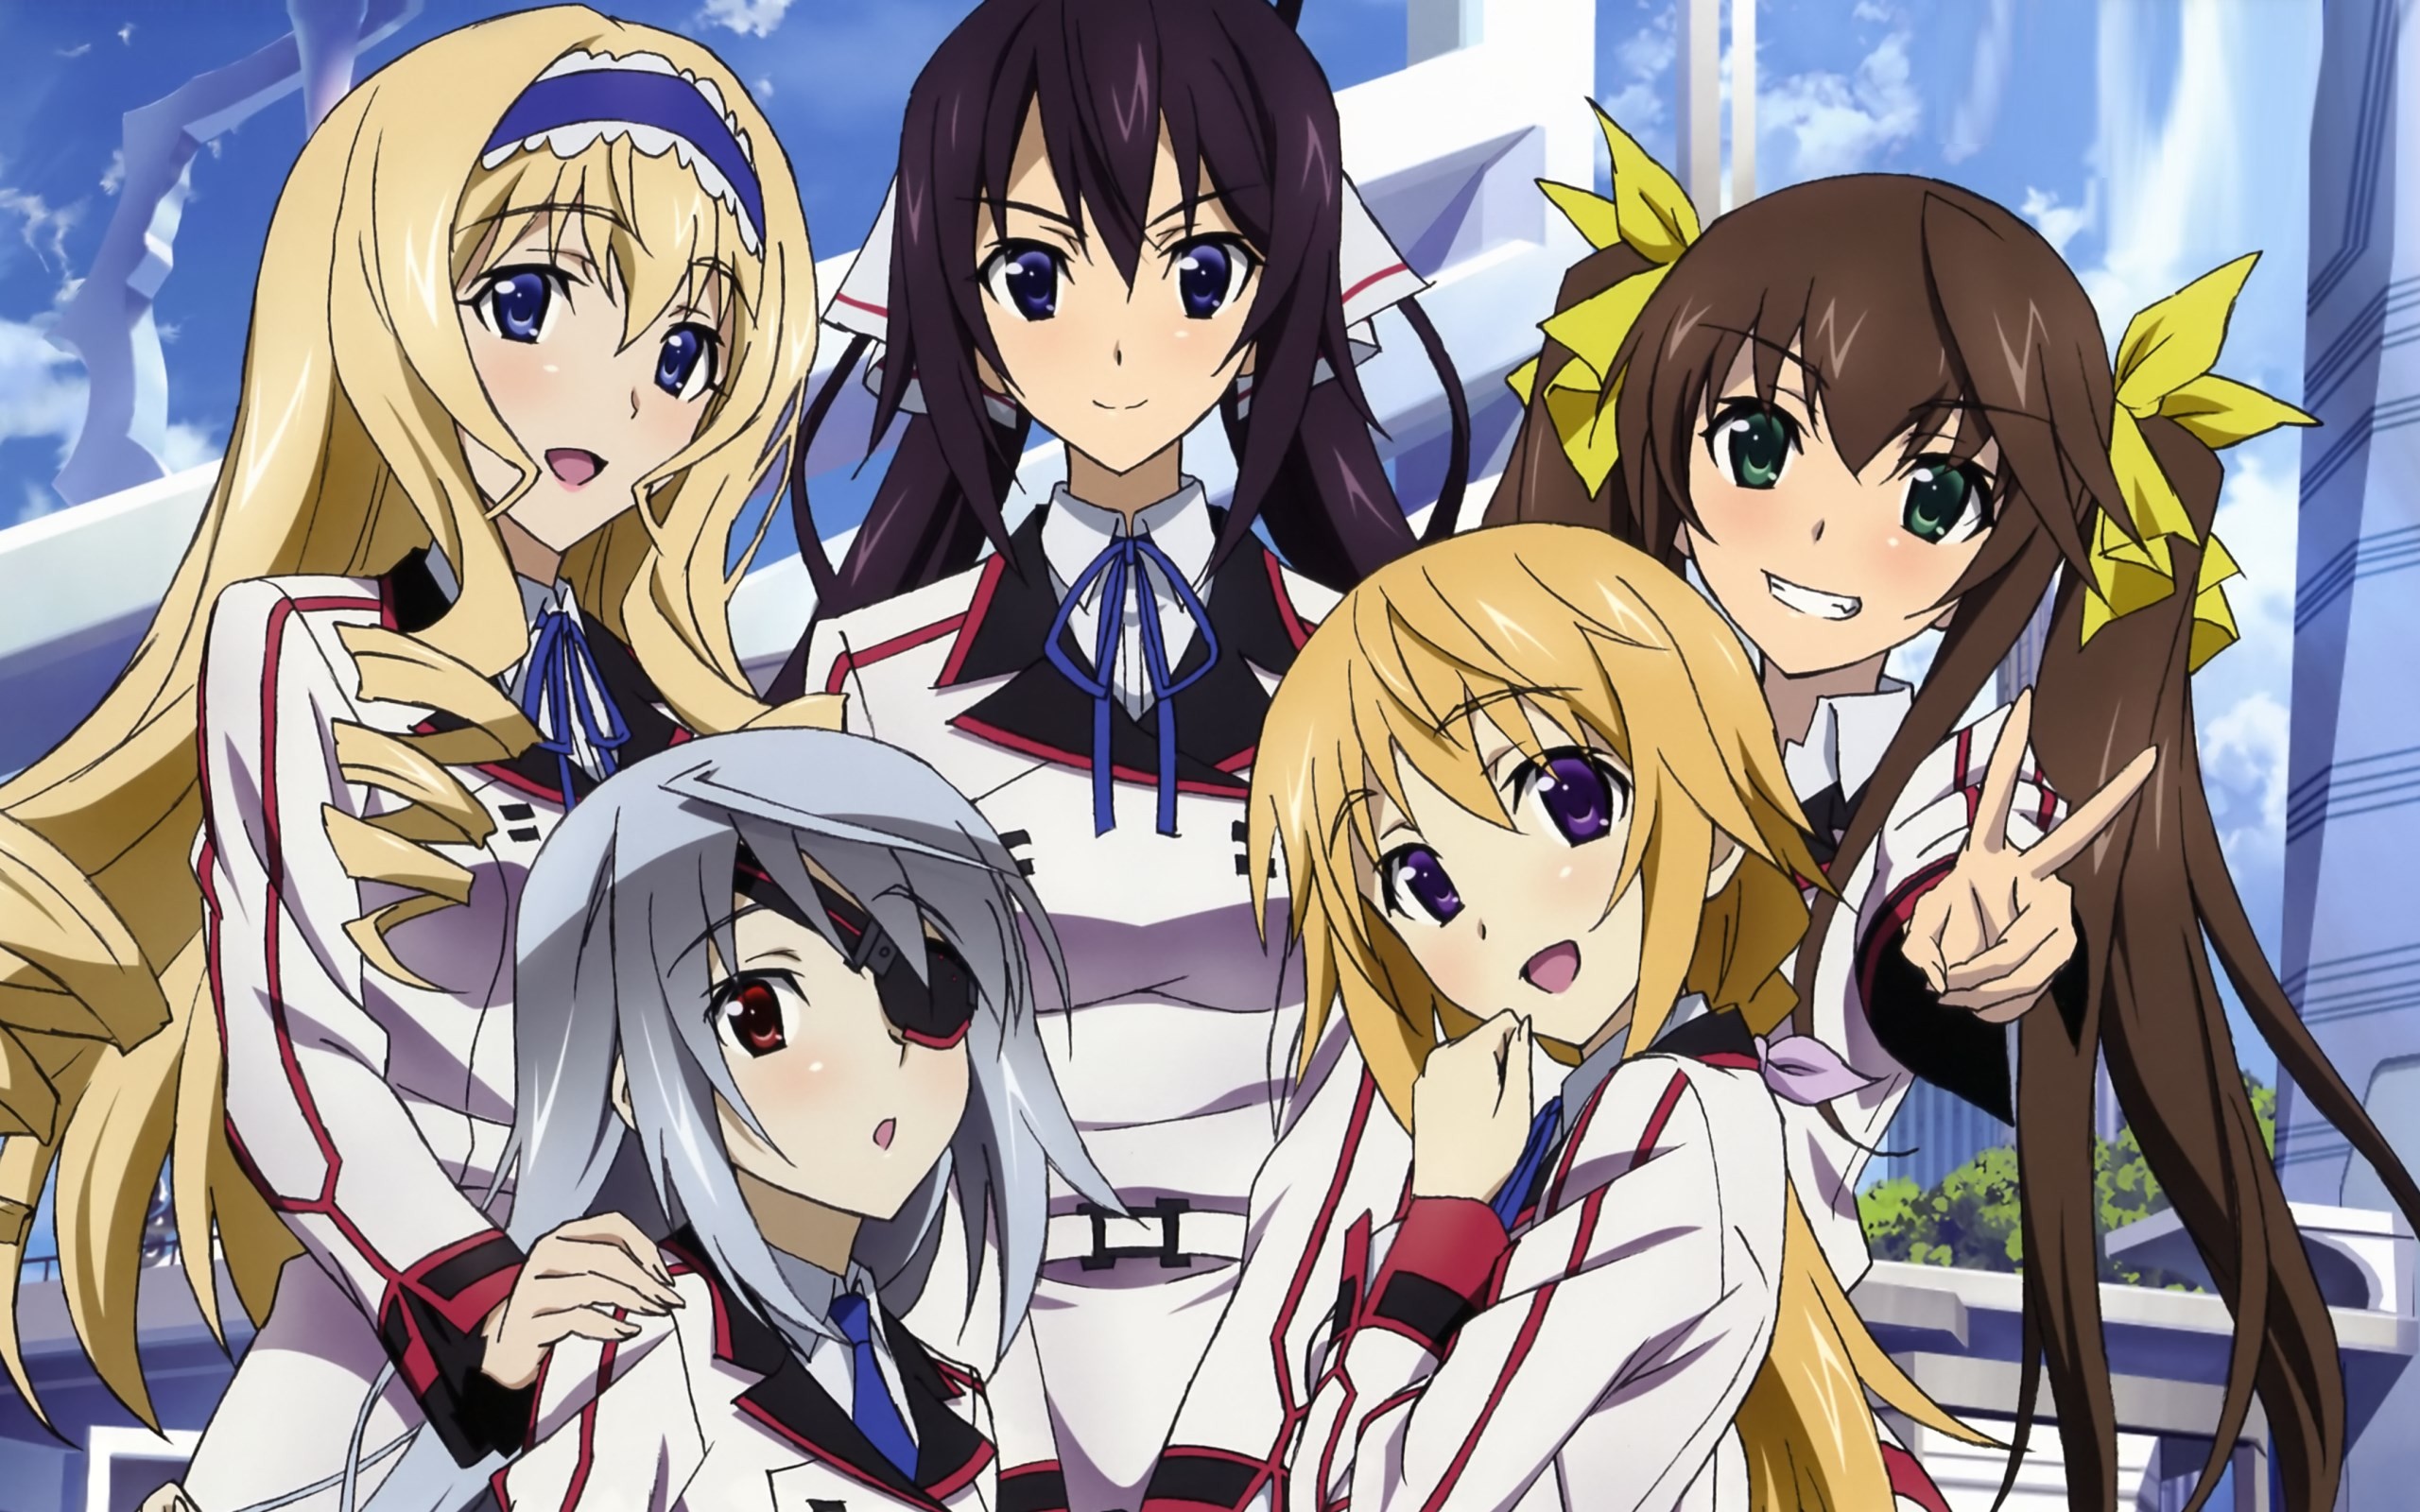 Anime 2560x1600 manga Infinite Stratos Alcot Cecilia Bodewig Laura  Dunois Charlotte group of women anime anime girls blue eyes blonde brunette hand gesture purple eyes eyepatches red eyes tie looking at viewer